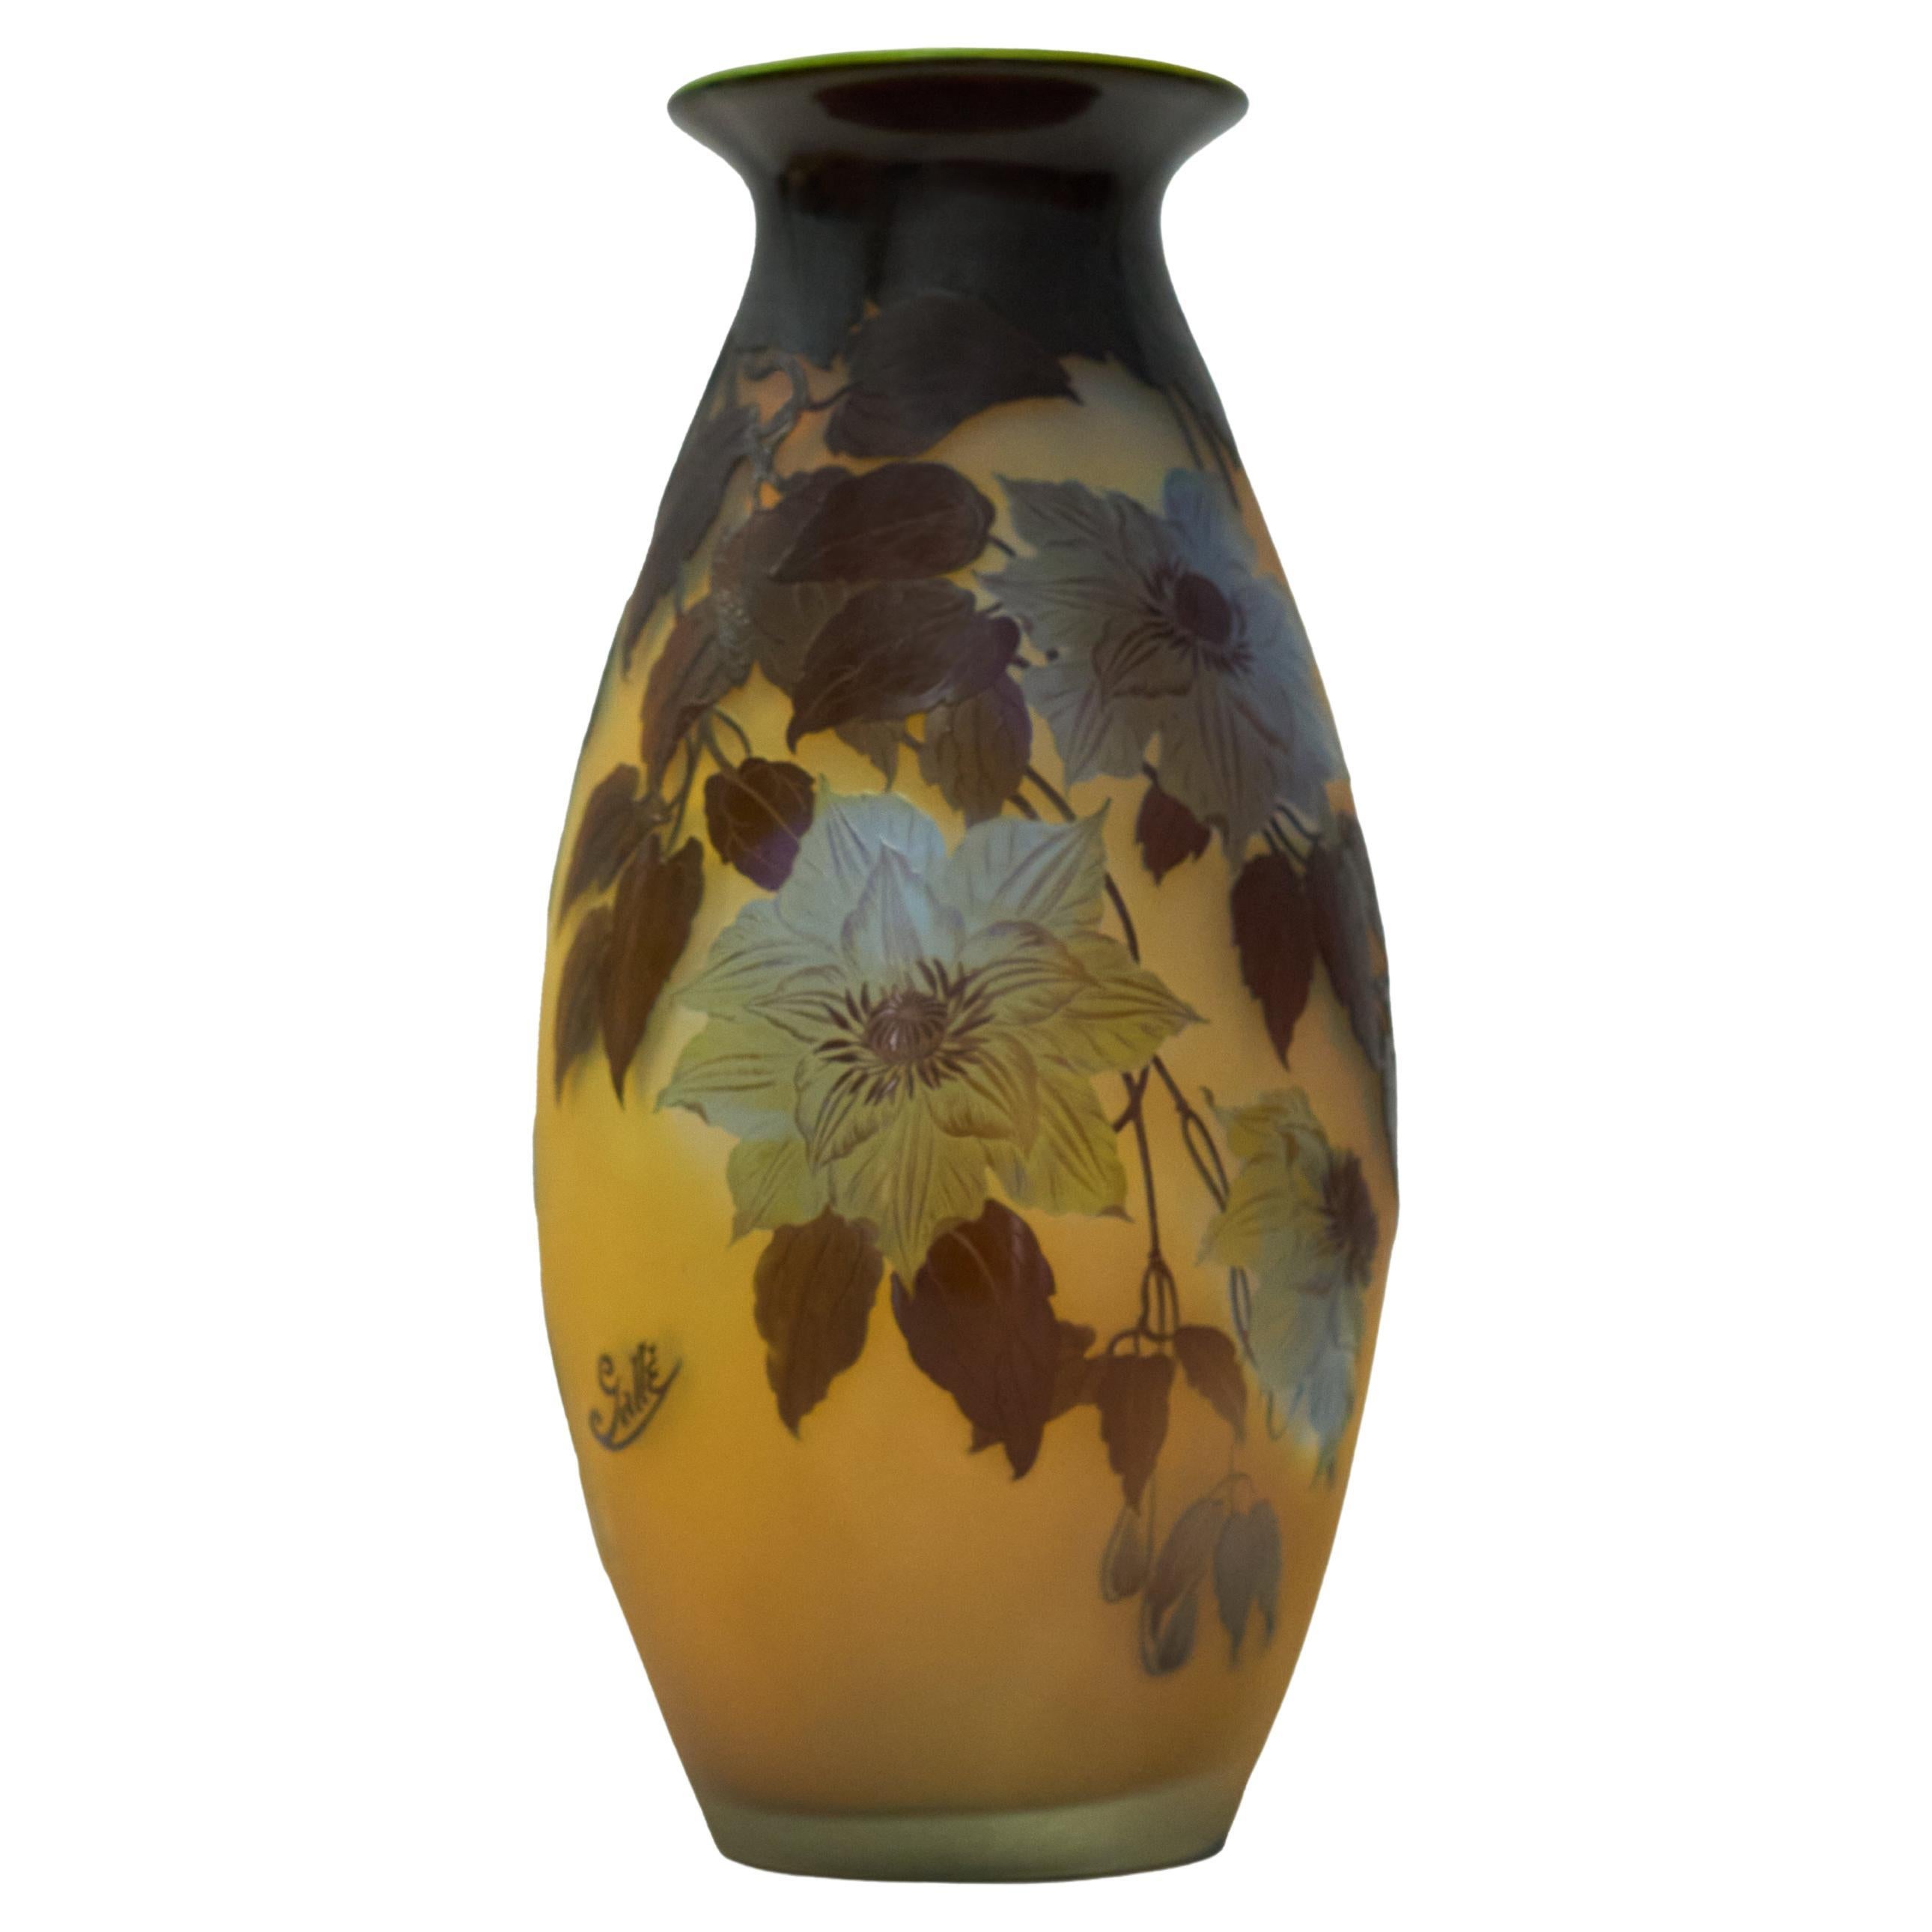 A large and impressive original Art Nouveau Emile Gallé cameo glass vase. colourless glass with a degrading amber layer overlaid in brown blue and green, etched and cut with flower blossom

Marked: Gallé.